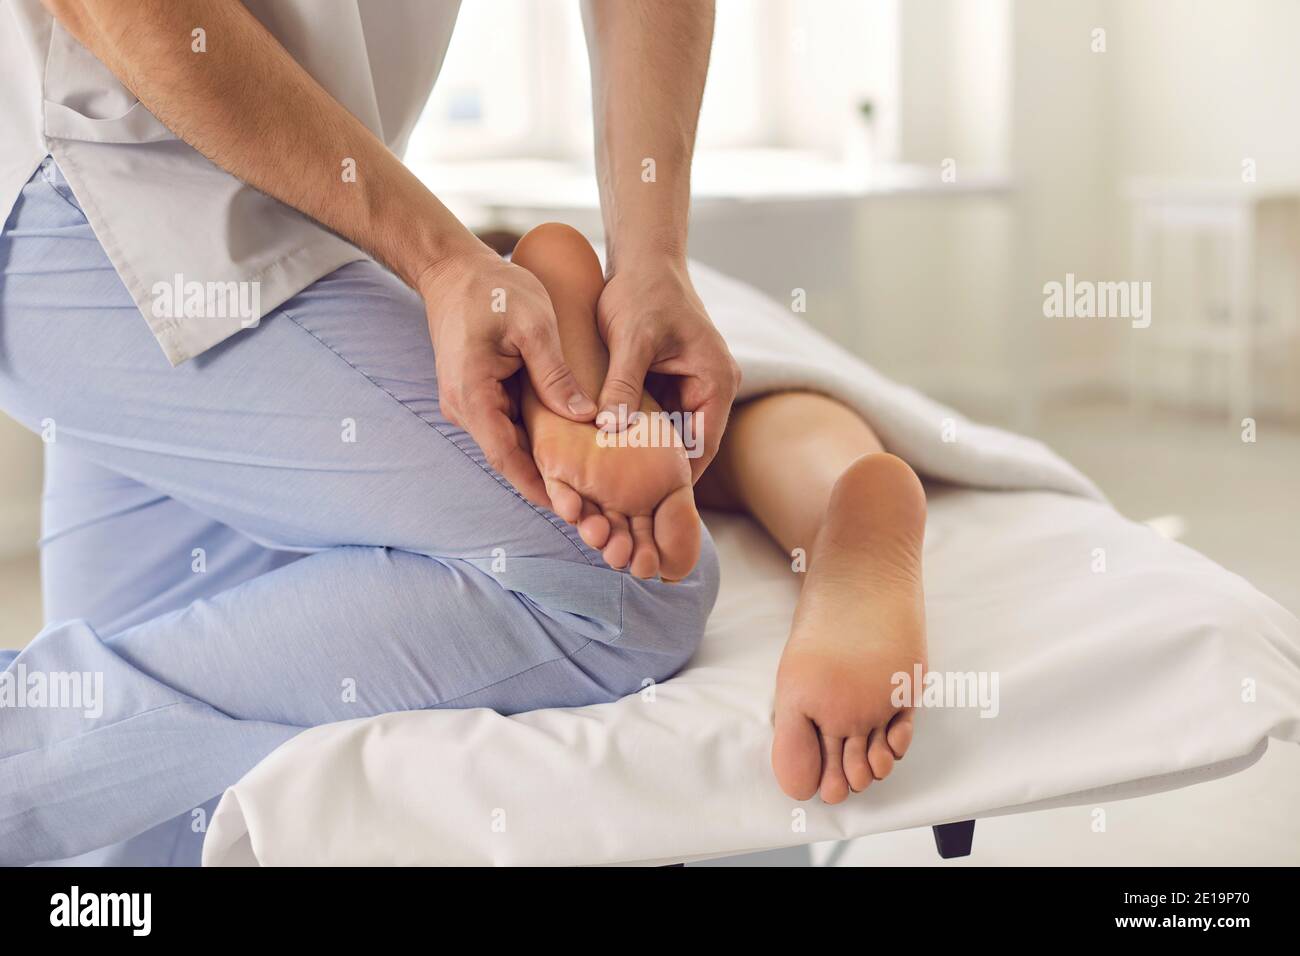 Hands of therapist doing treatment of acupressure or manual massage for patients feet Stock Photo